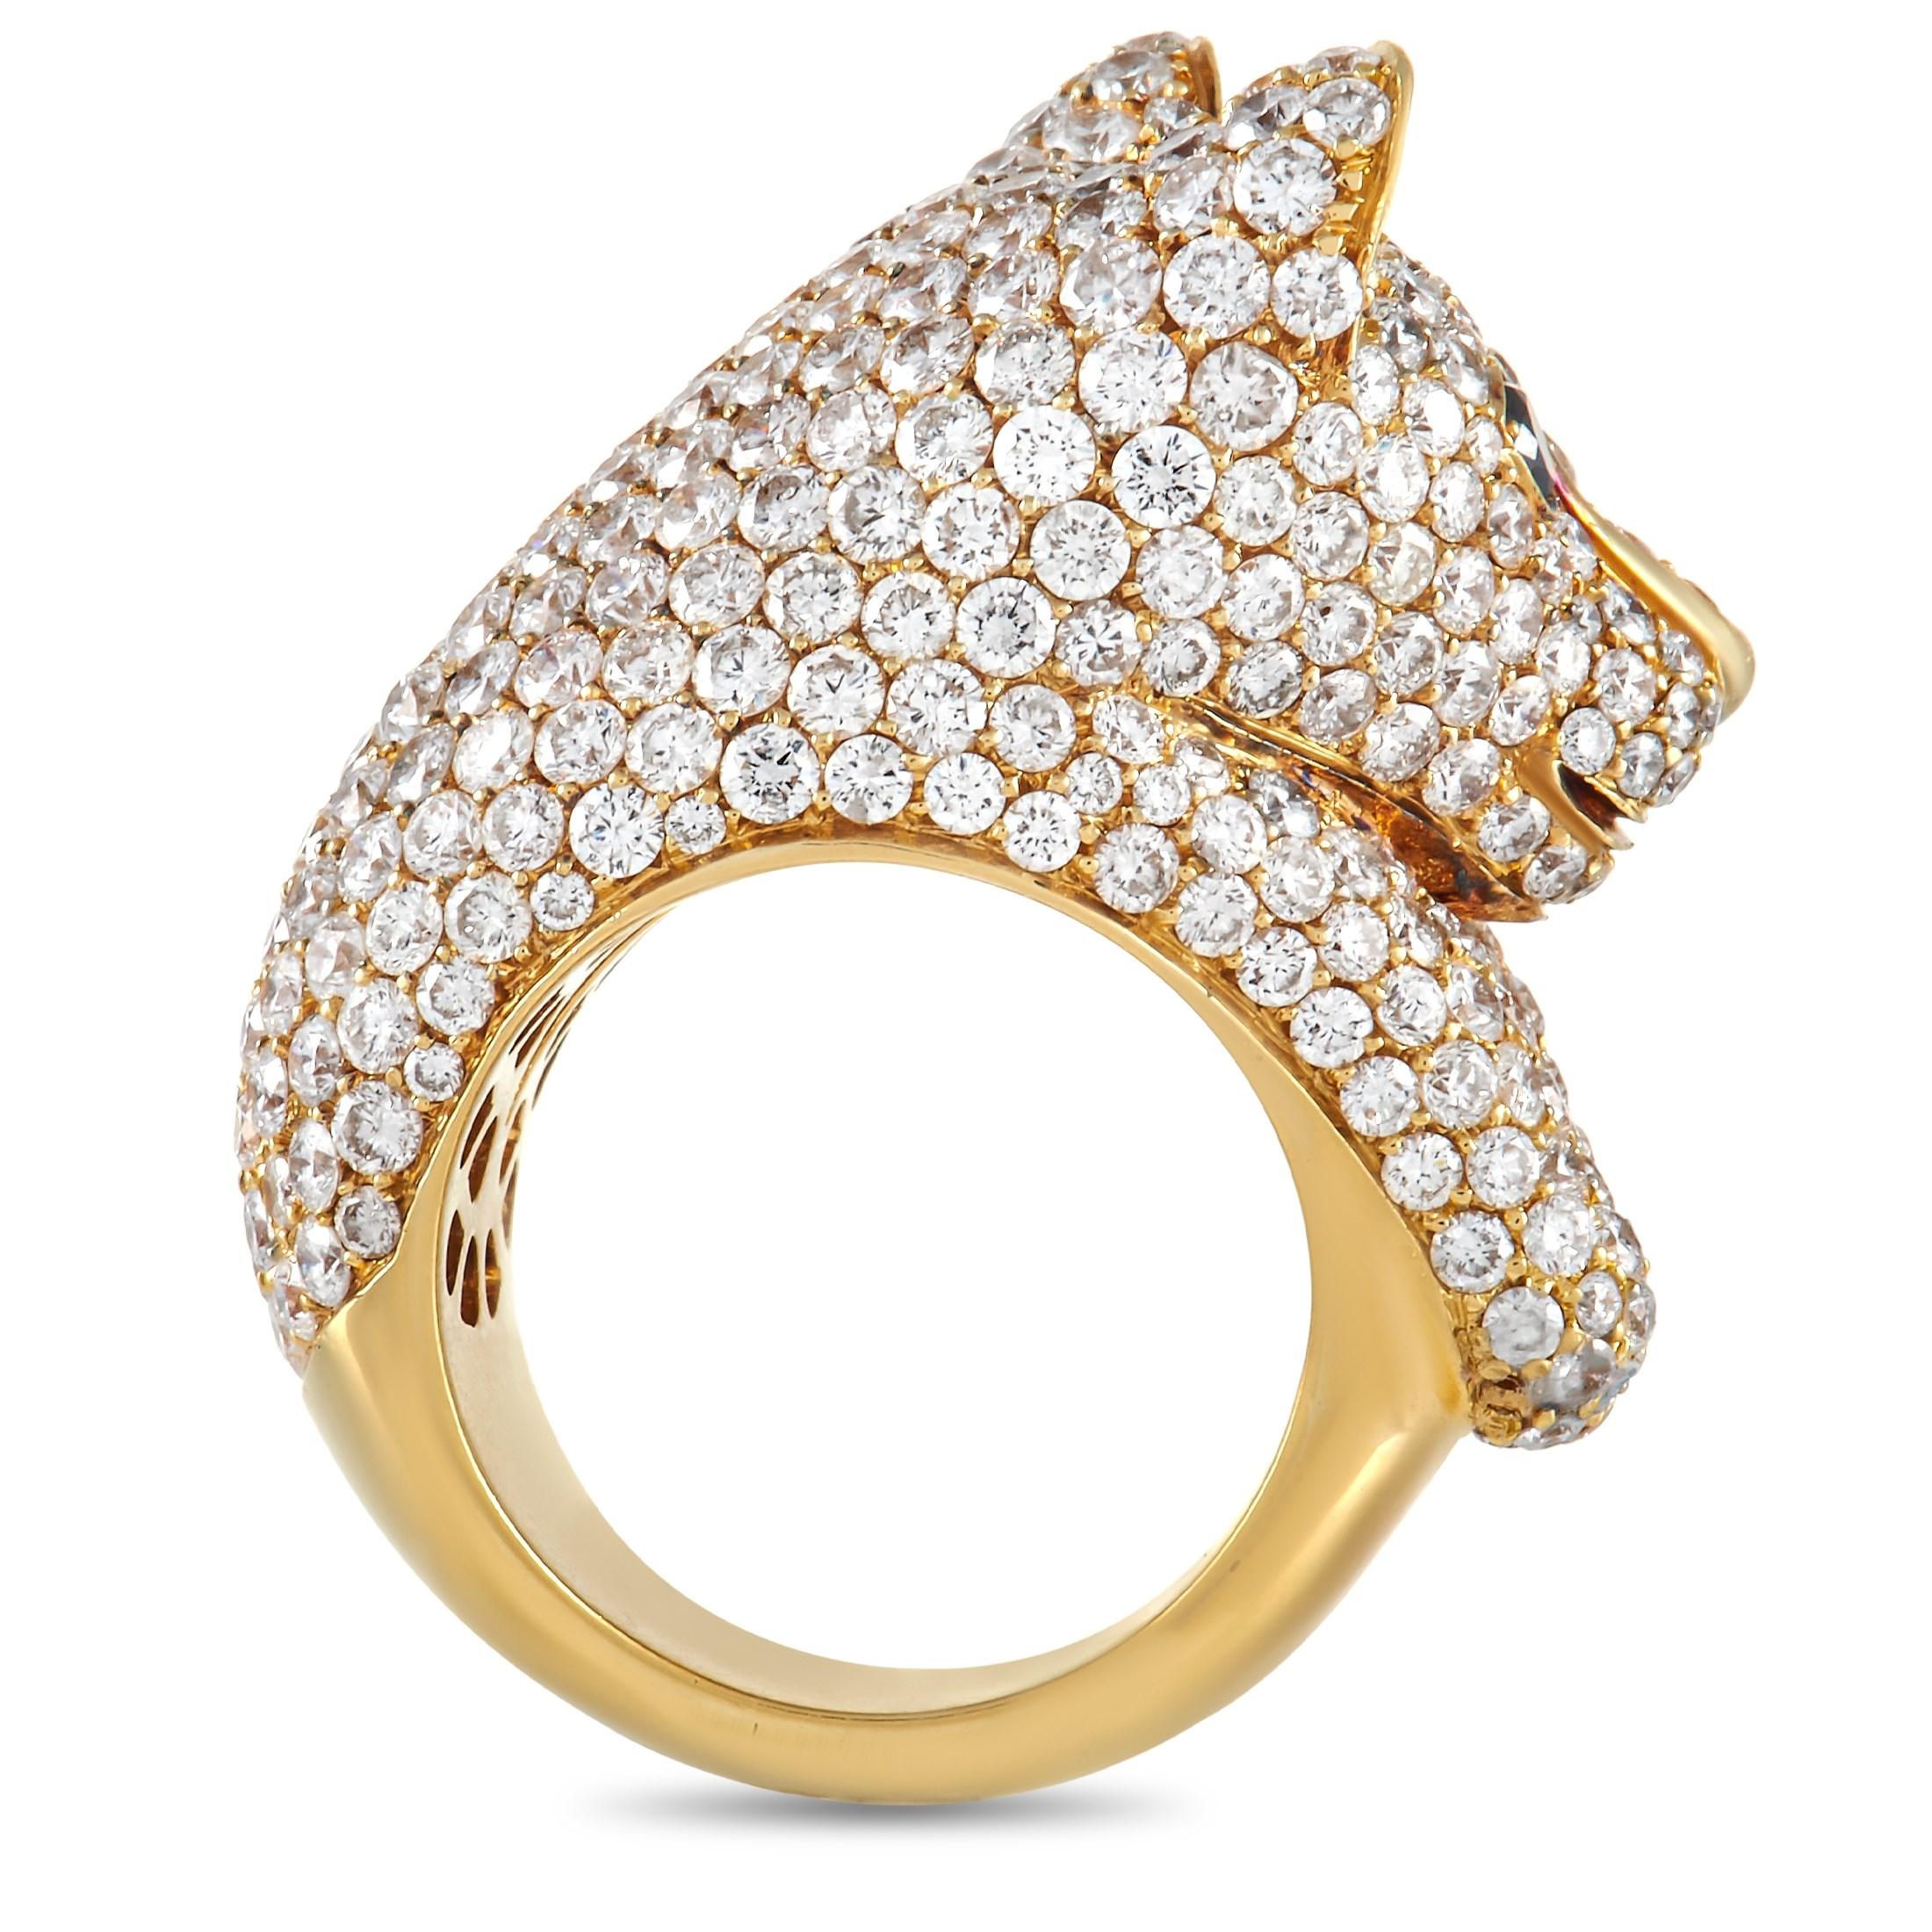 Take a walk on the wild side with this bold LB Exclusive 18K Yellow Gold 15.00 ct Diamond Panther Ring! The ring is made with 18K, forming a thick band with a matching 18K yellow gold Panther on the front of the ring. The panther is set with rows of